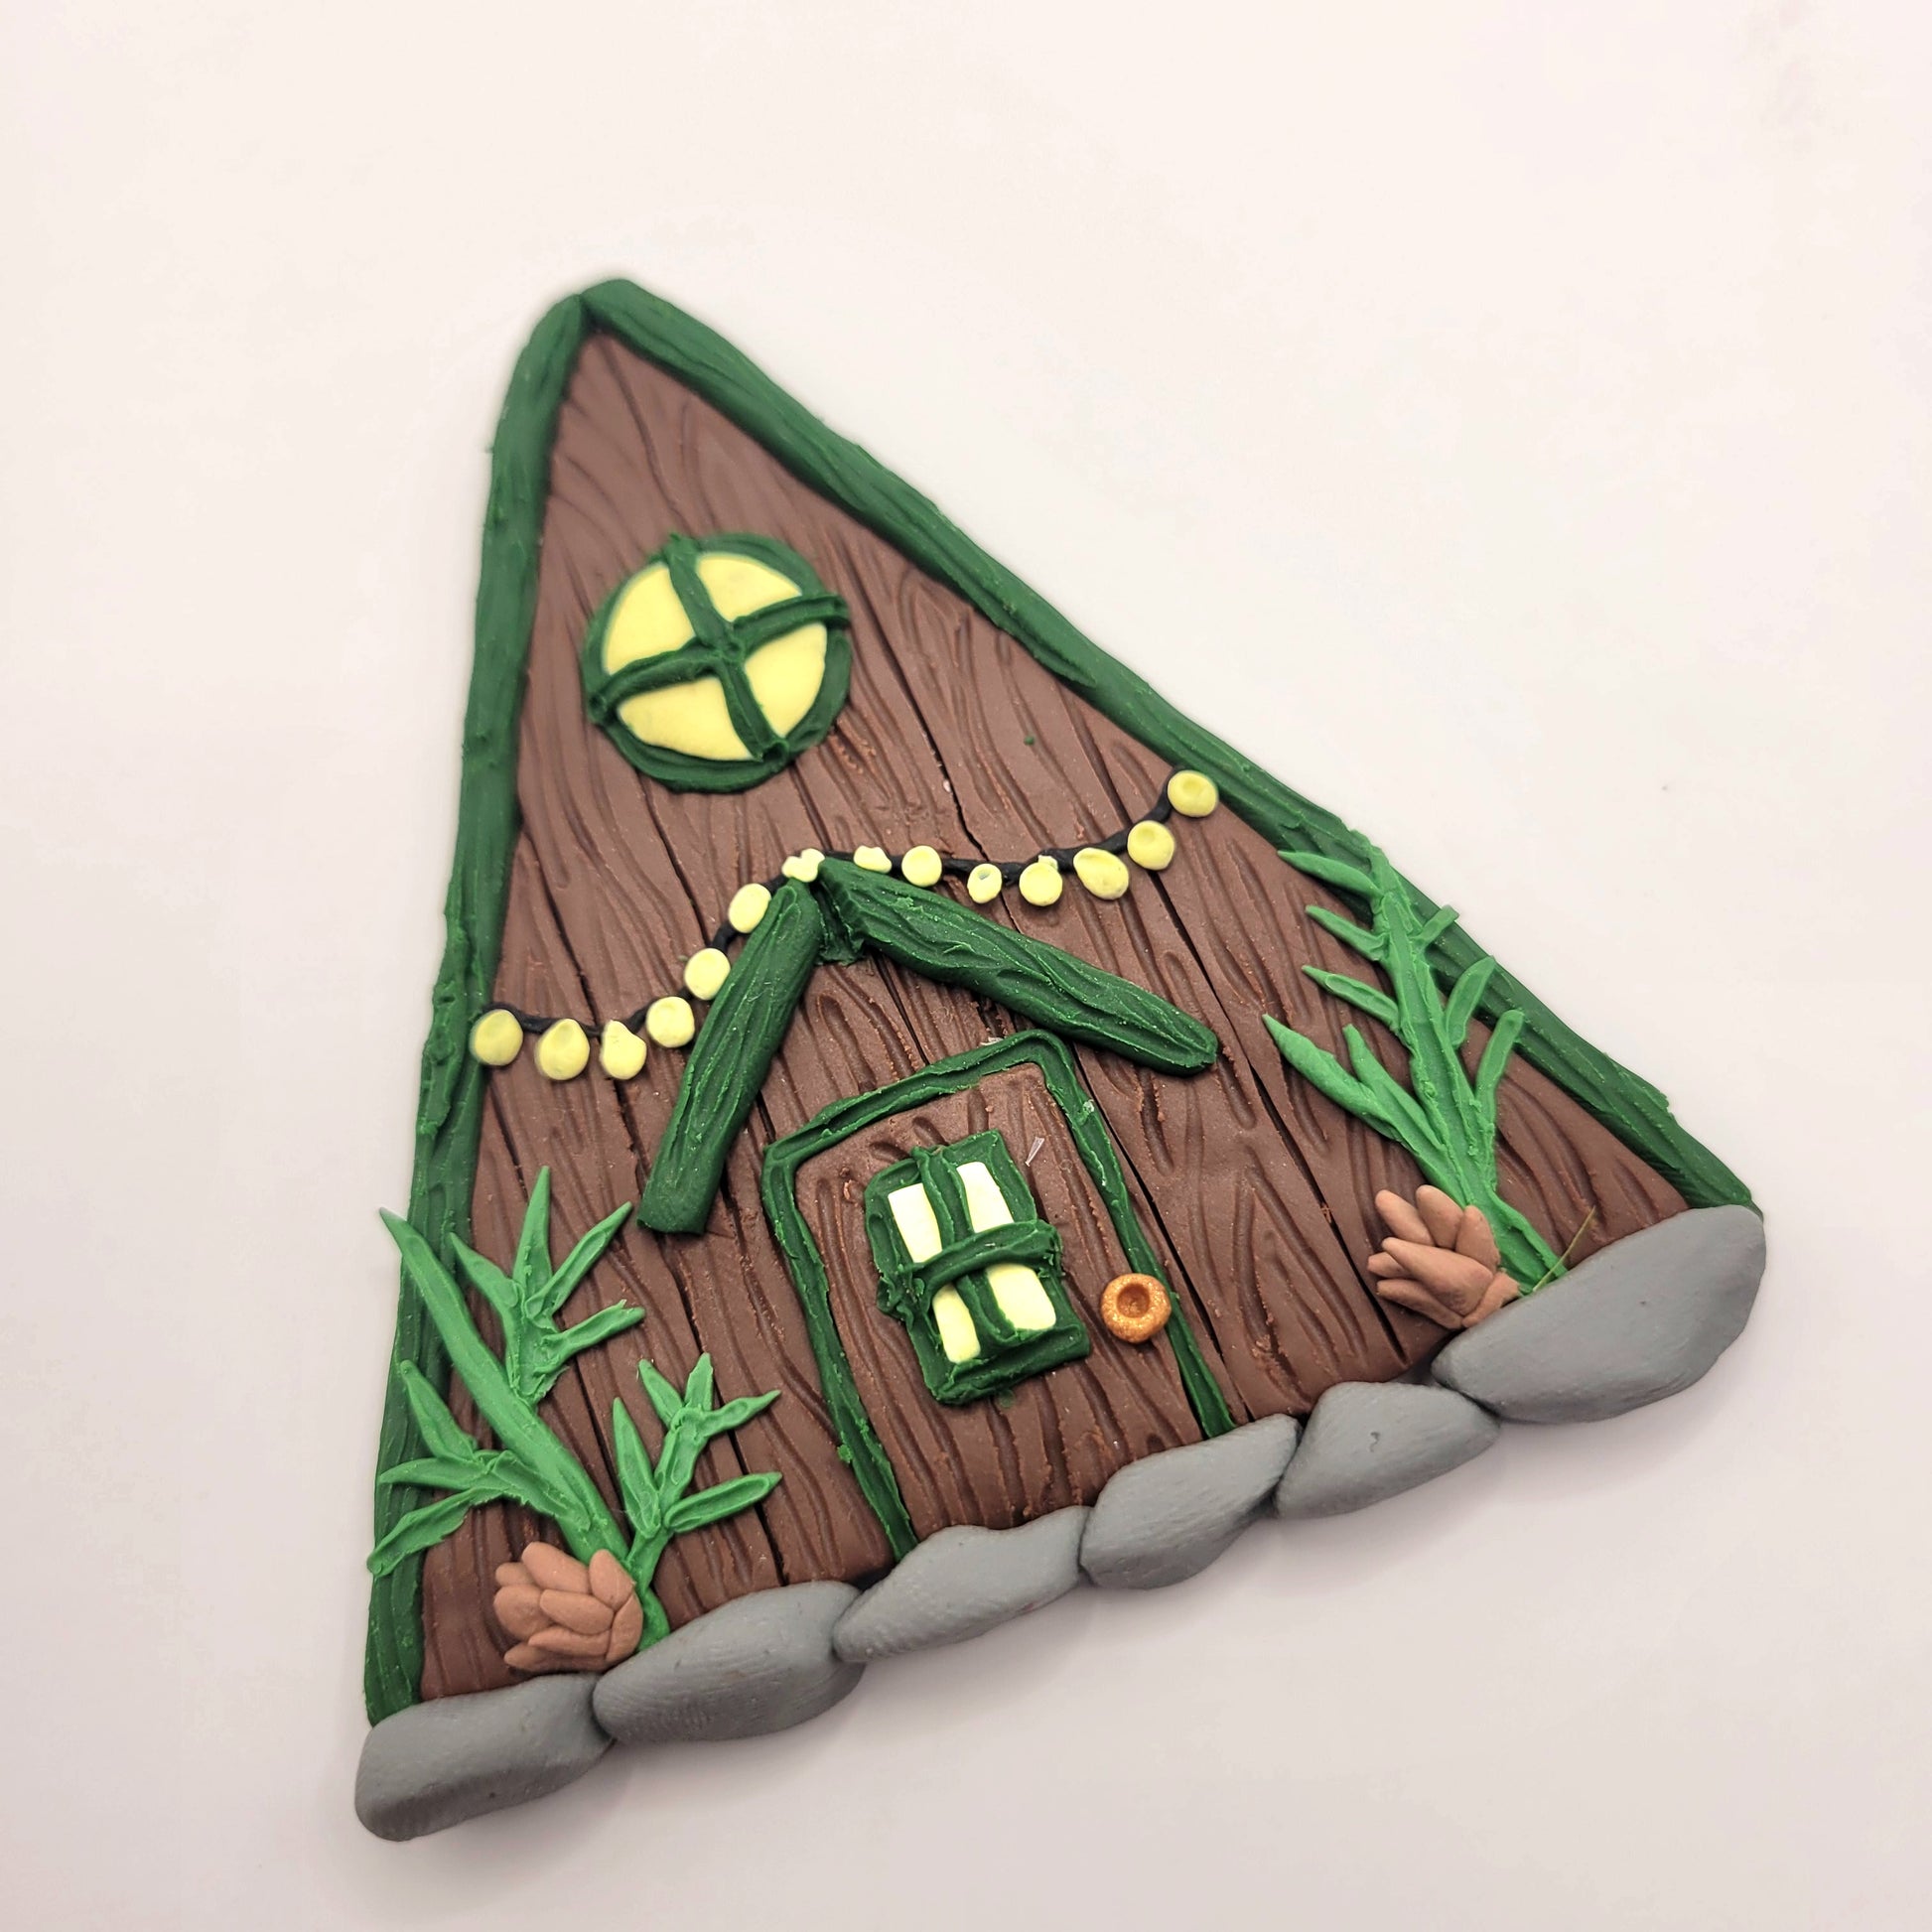 The alpine cabin fairy door rests on a white background at an angle. It is brown with a forest green roof and detailed with a window, fairy lights, door, spruce sprigs and pinecones.